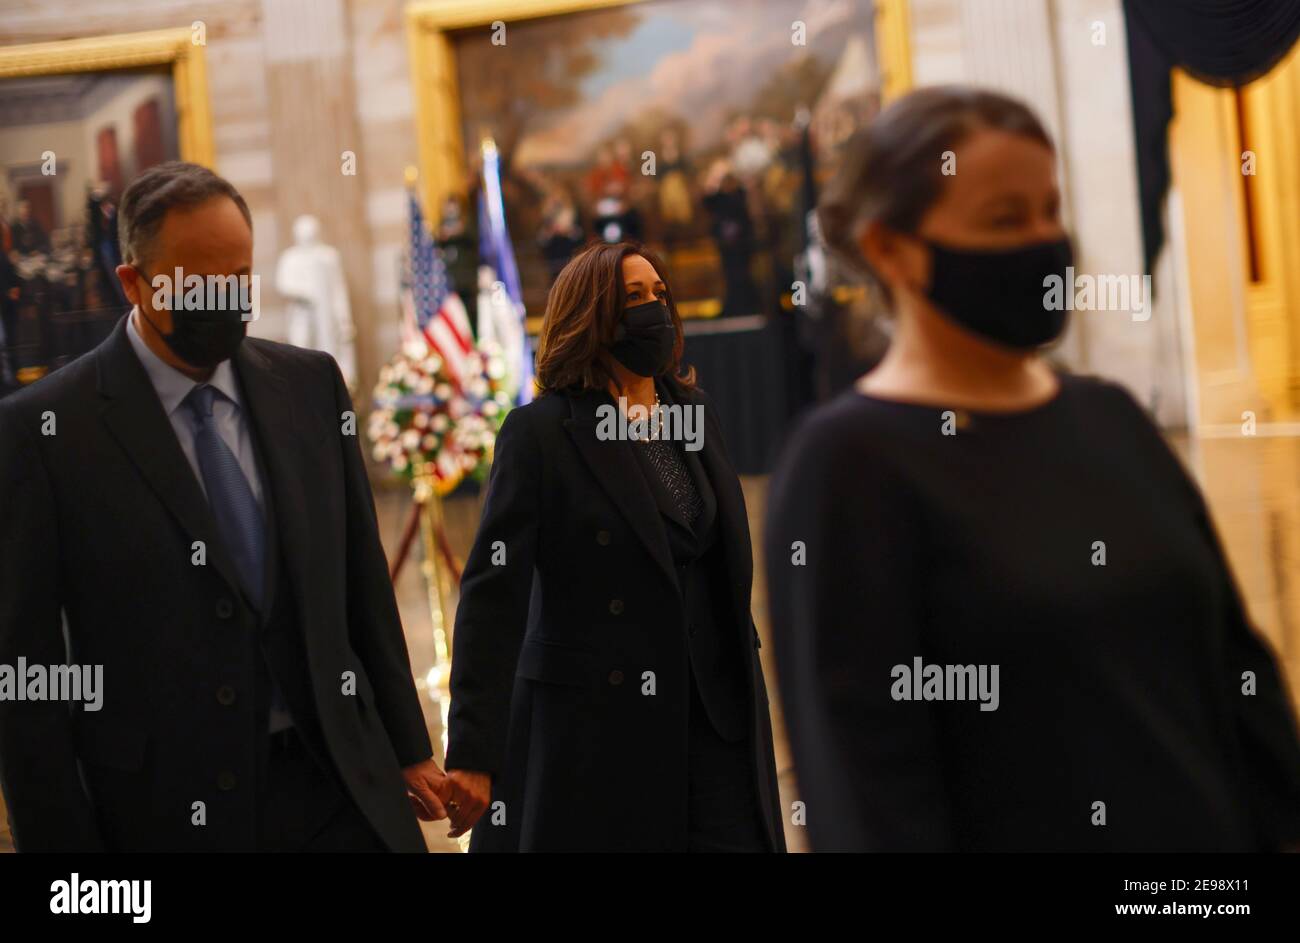 Washigton, USA. 03rd Feb, 2021. U.S. Vice President Kamala Harris and her husband Doug Emhoff pay their respects as the remains of Capitol Police officer Brian Sicknick lay in honor in the Rotunda of the U.S. Capitol building after he died on Jan. 7 from injuries he sustained while protecting the U.S. Capitol during the Jan. 6 attack on the building, in Washington, DC, U.S. February 3, 2021. (Photo by Carlos Barria/Pool/Sipa USA) Credit: Sipa USA/Alamy Live News Stock Photo